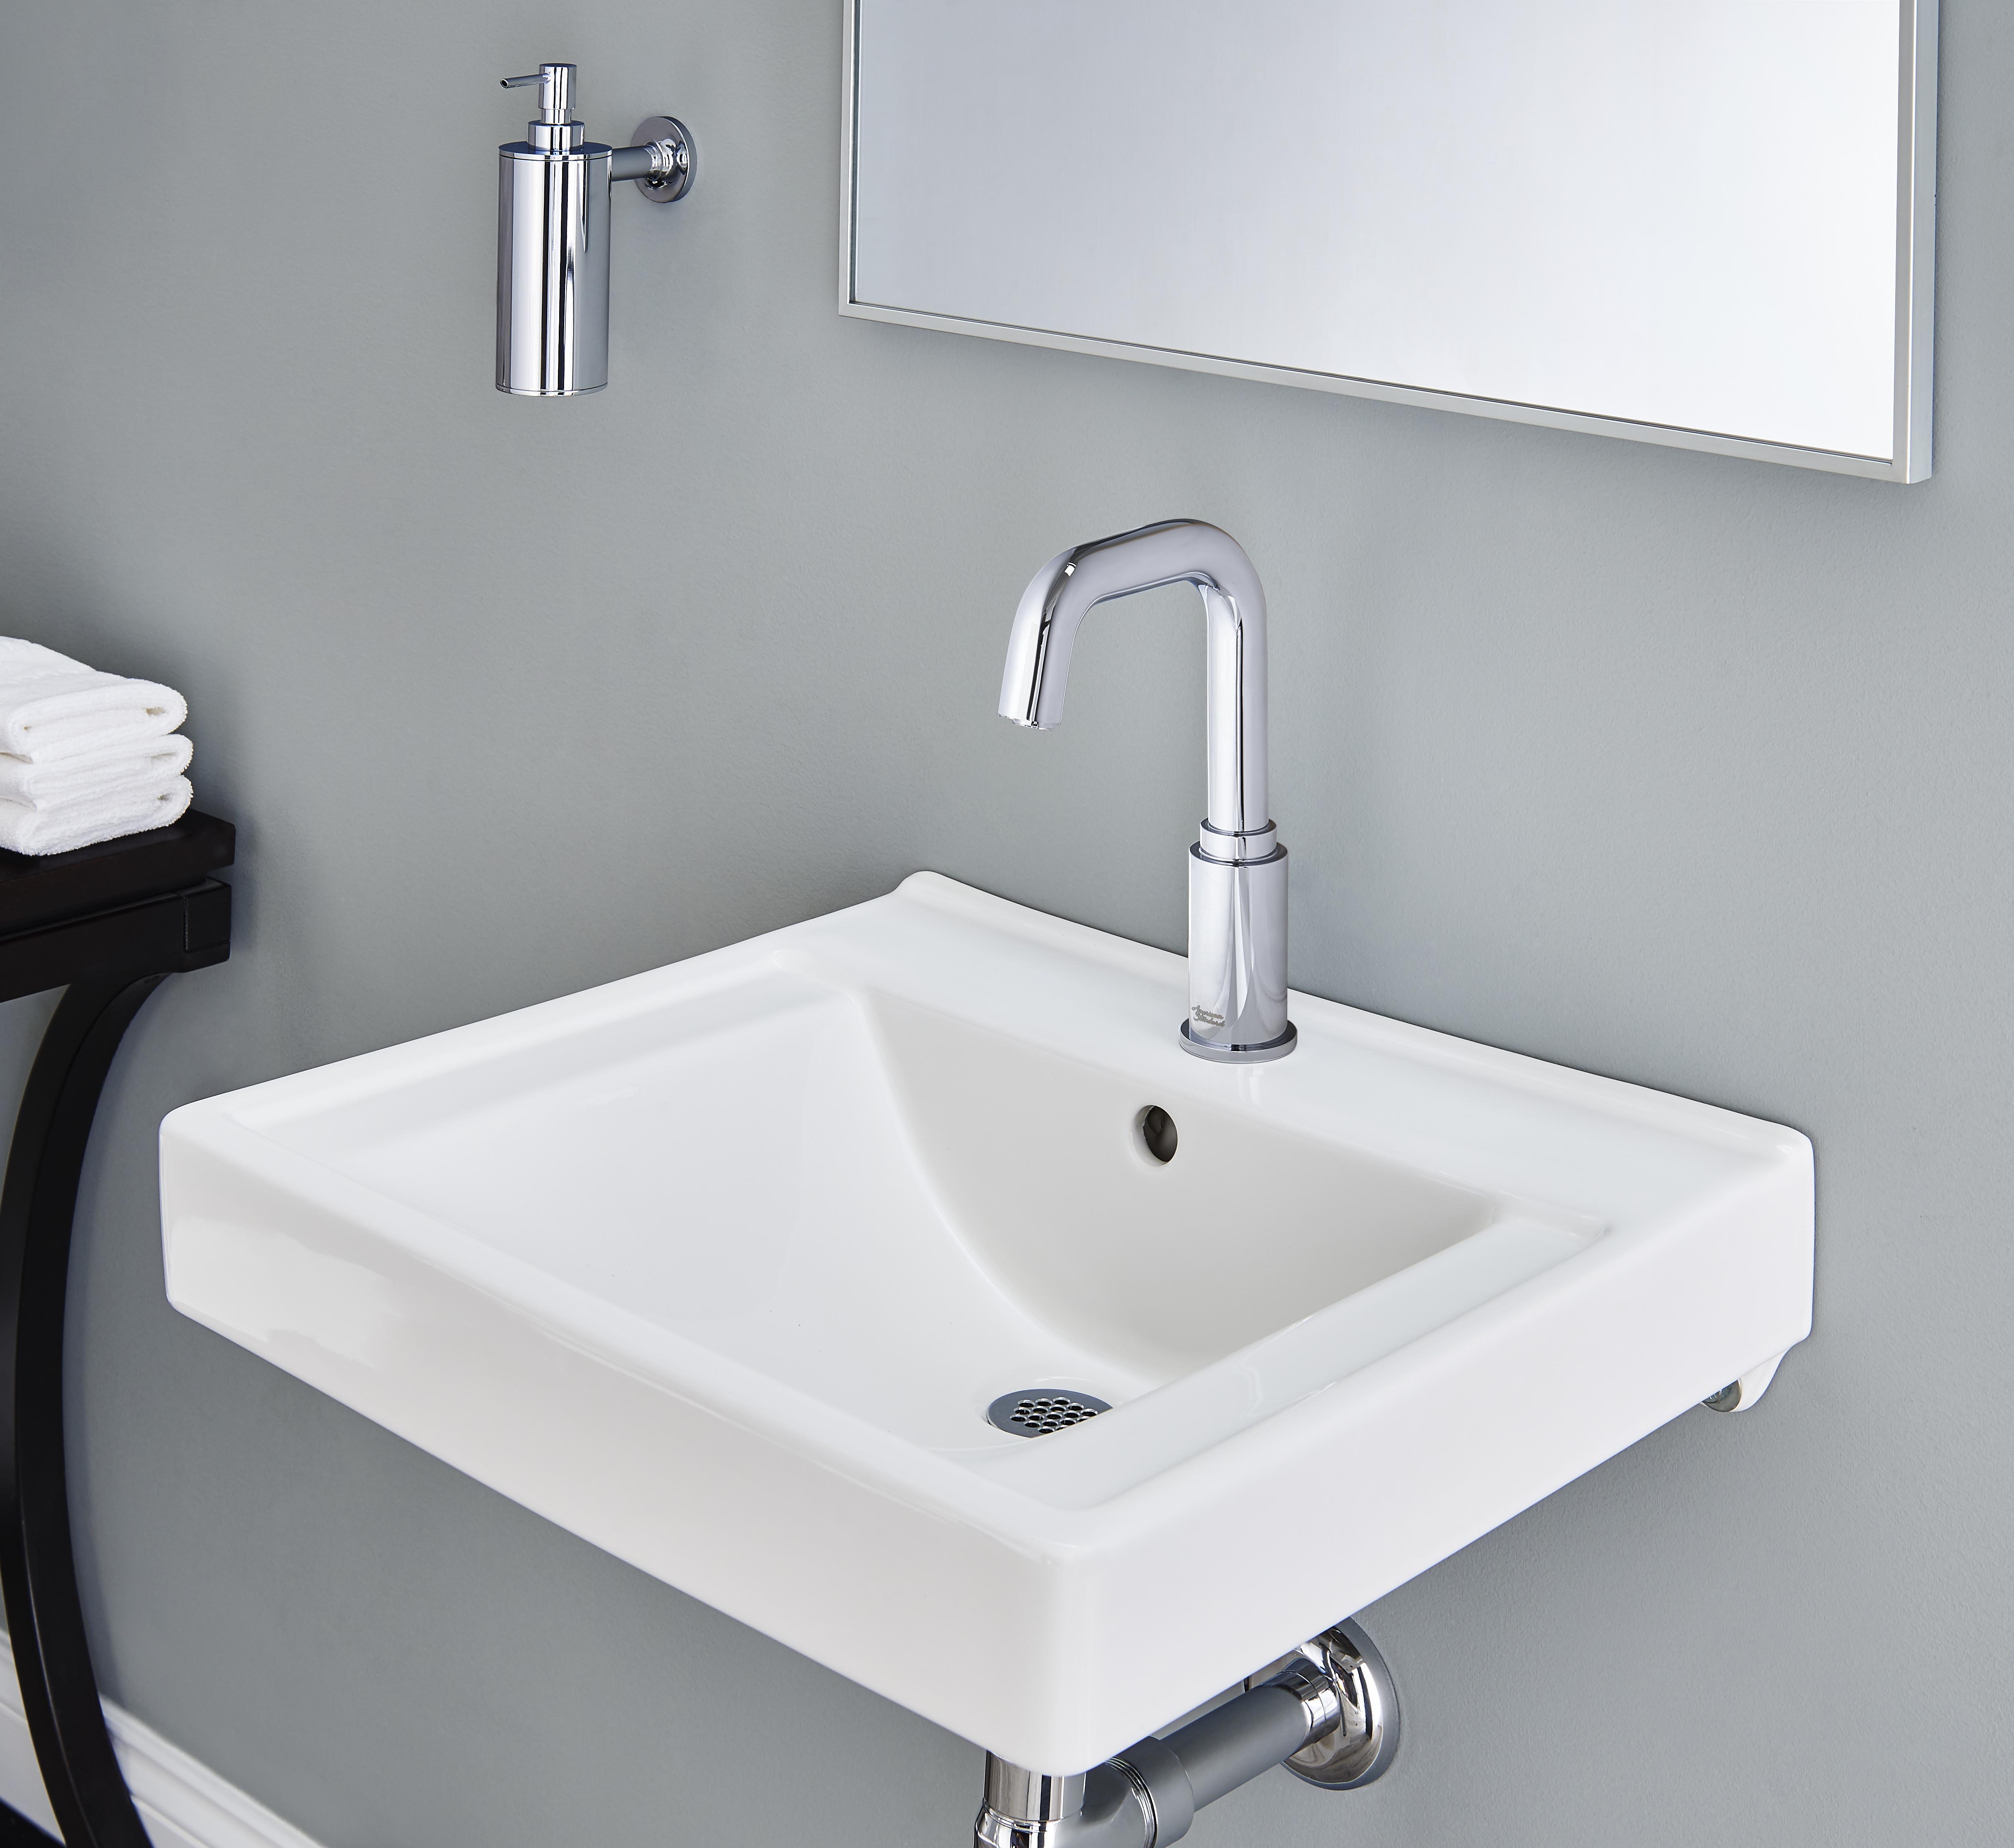 Serin™ Touchless Faucet, Base Model, 1.5 gpm/5.7 Lpm